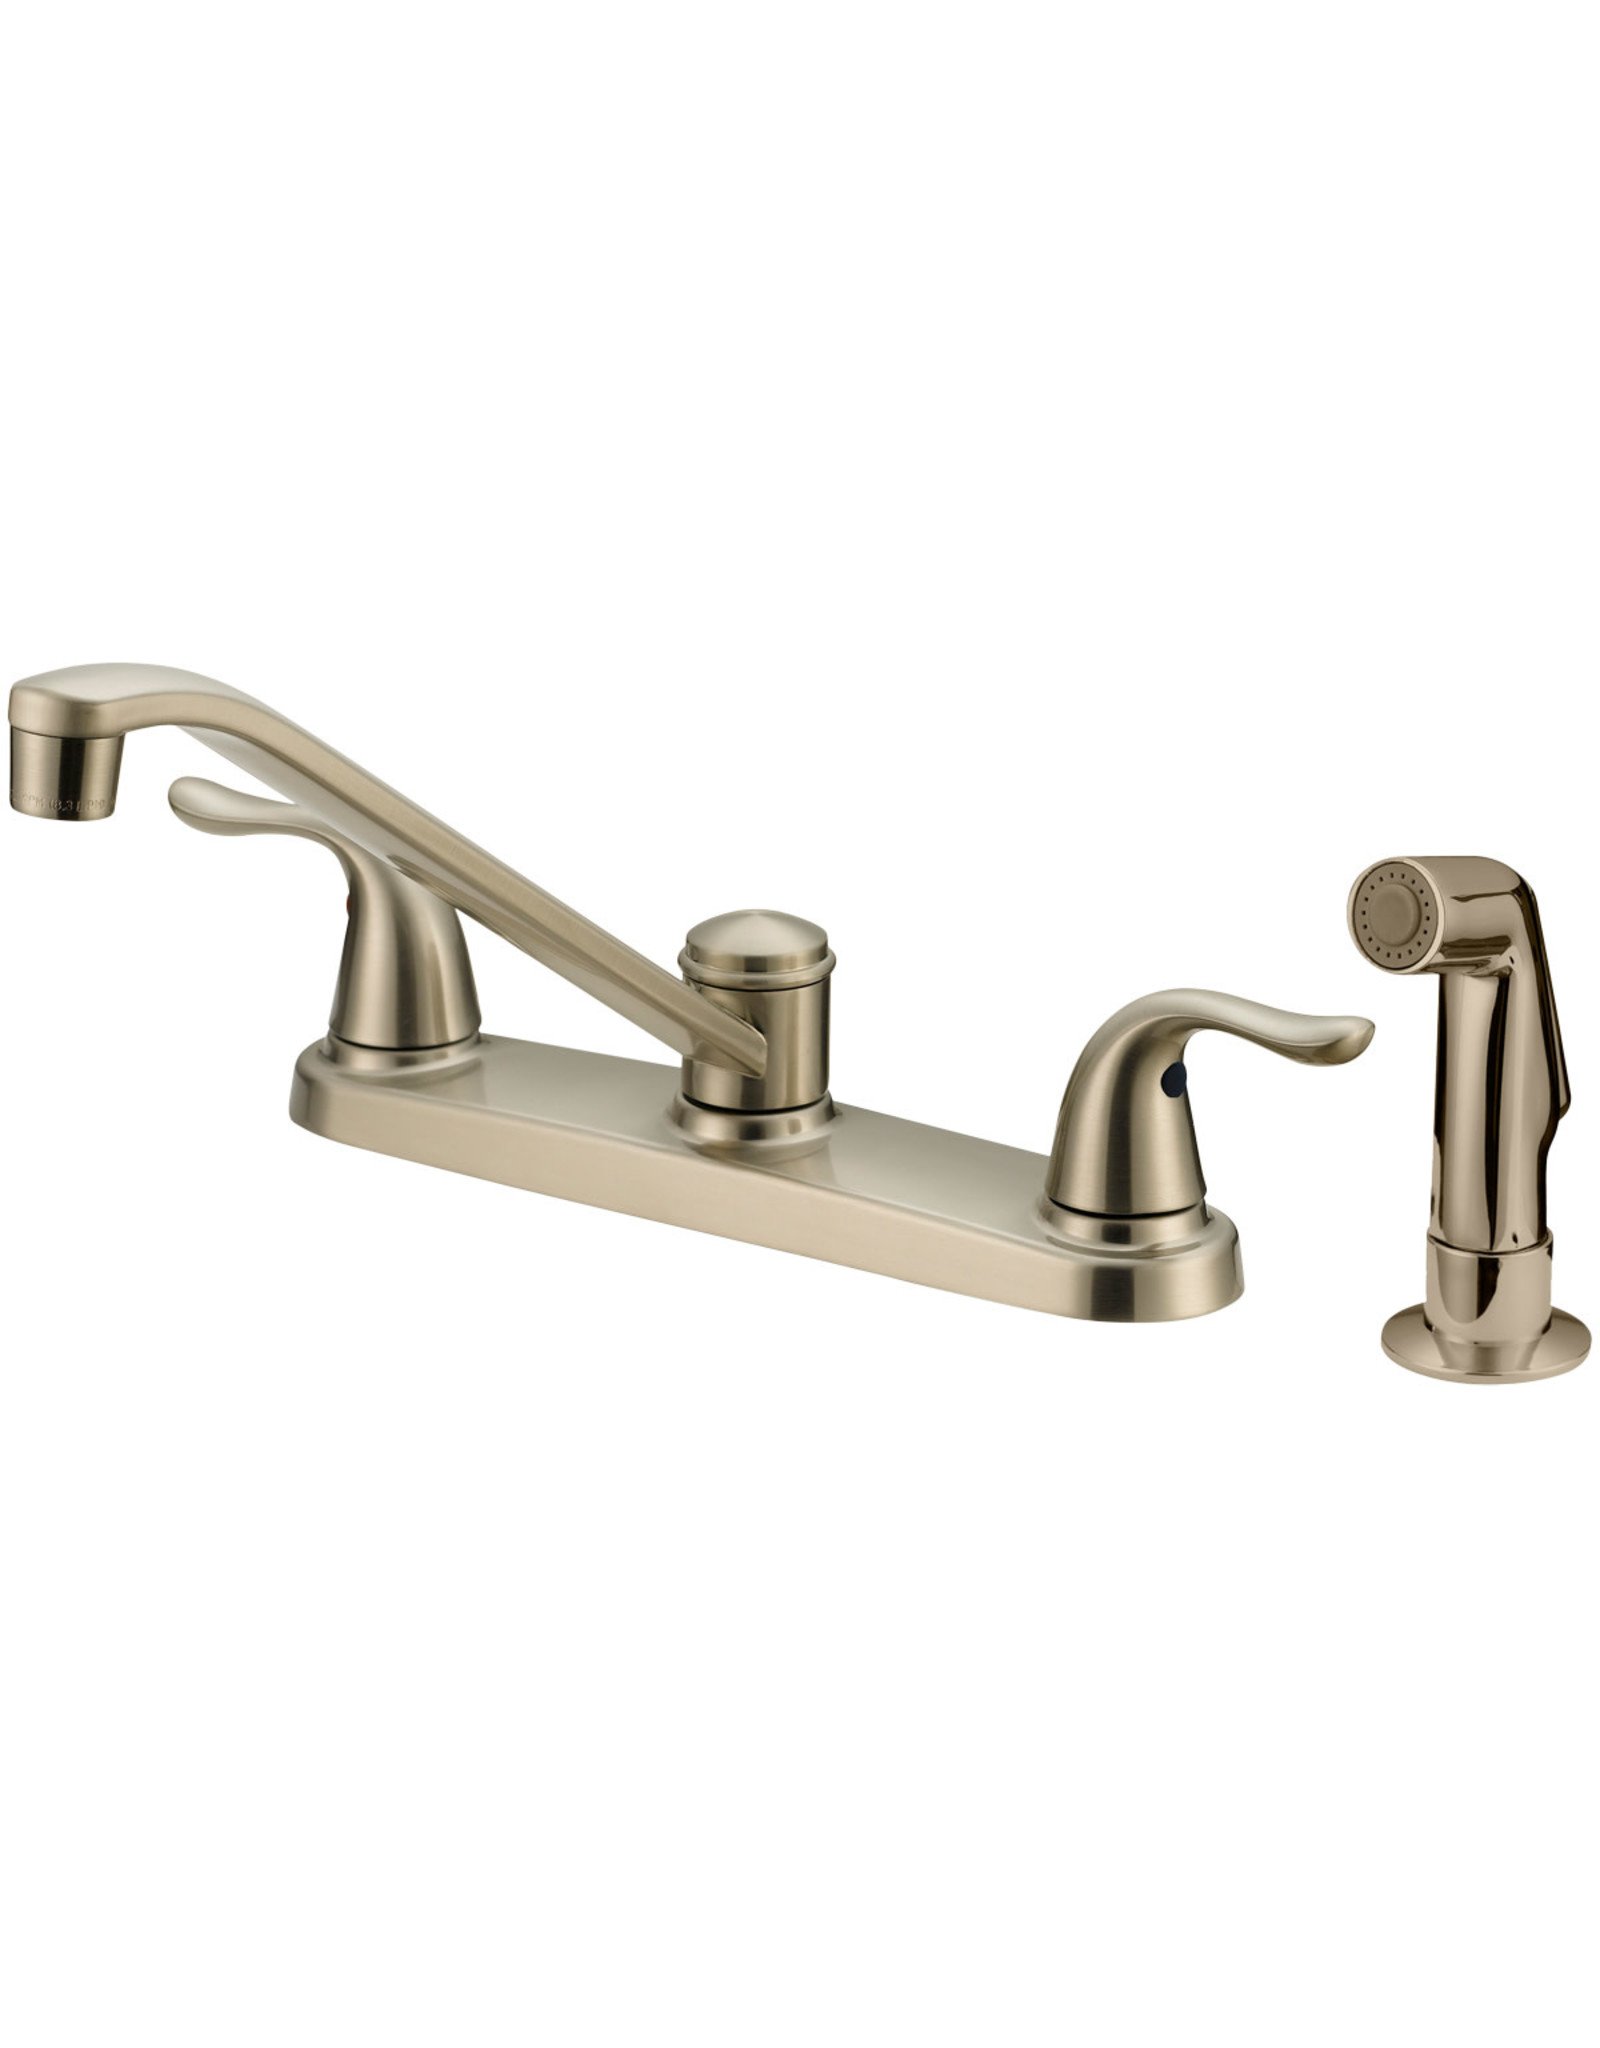 Two-Handle Kitchen Faucet – Brushed Nickel